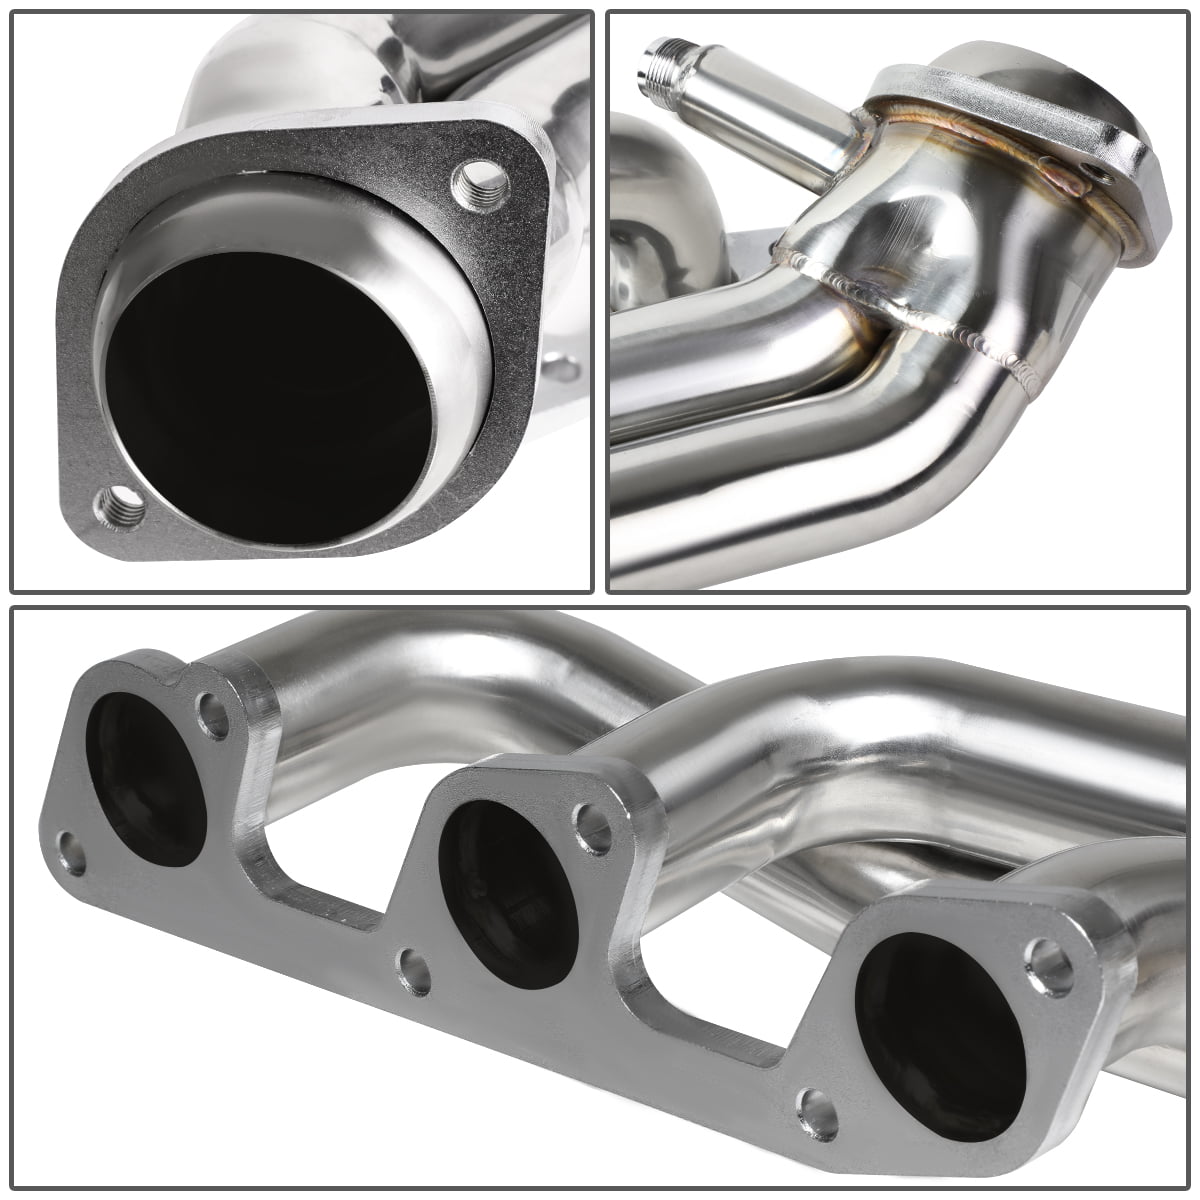 DNA Motoring HDS-FM05-40L-SHORTY Stainless Steel Exhaust Header Manifold for Ford Mustang 